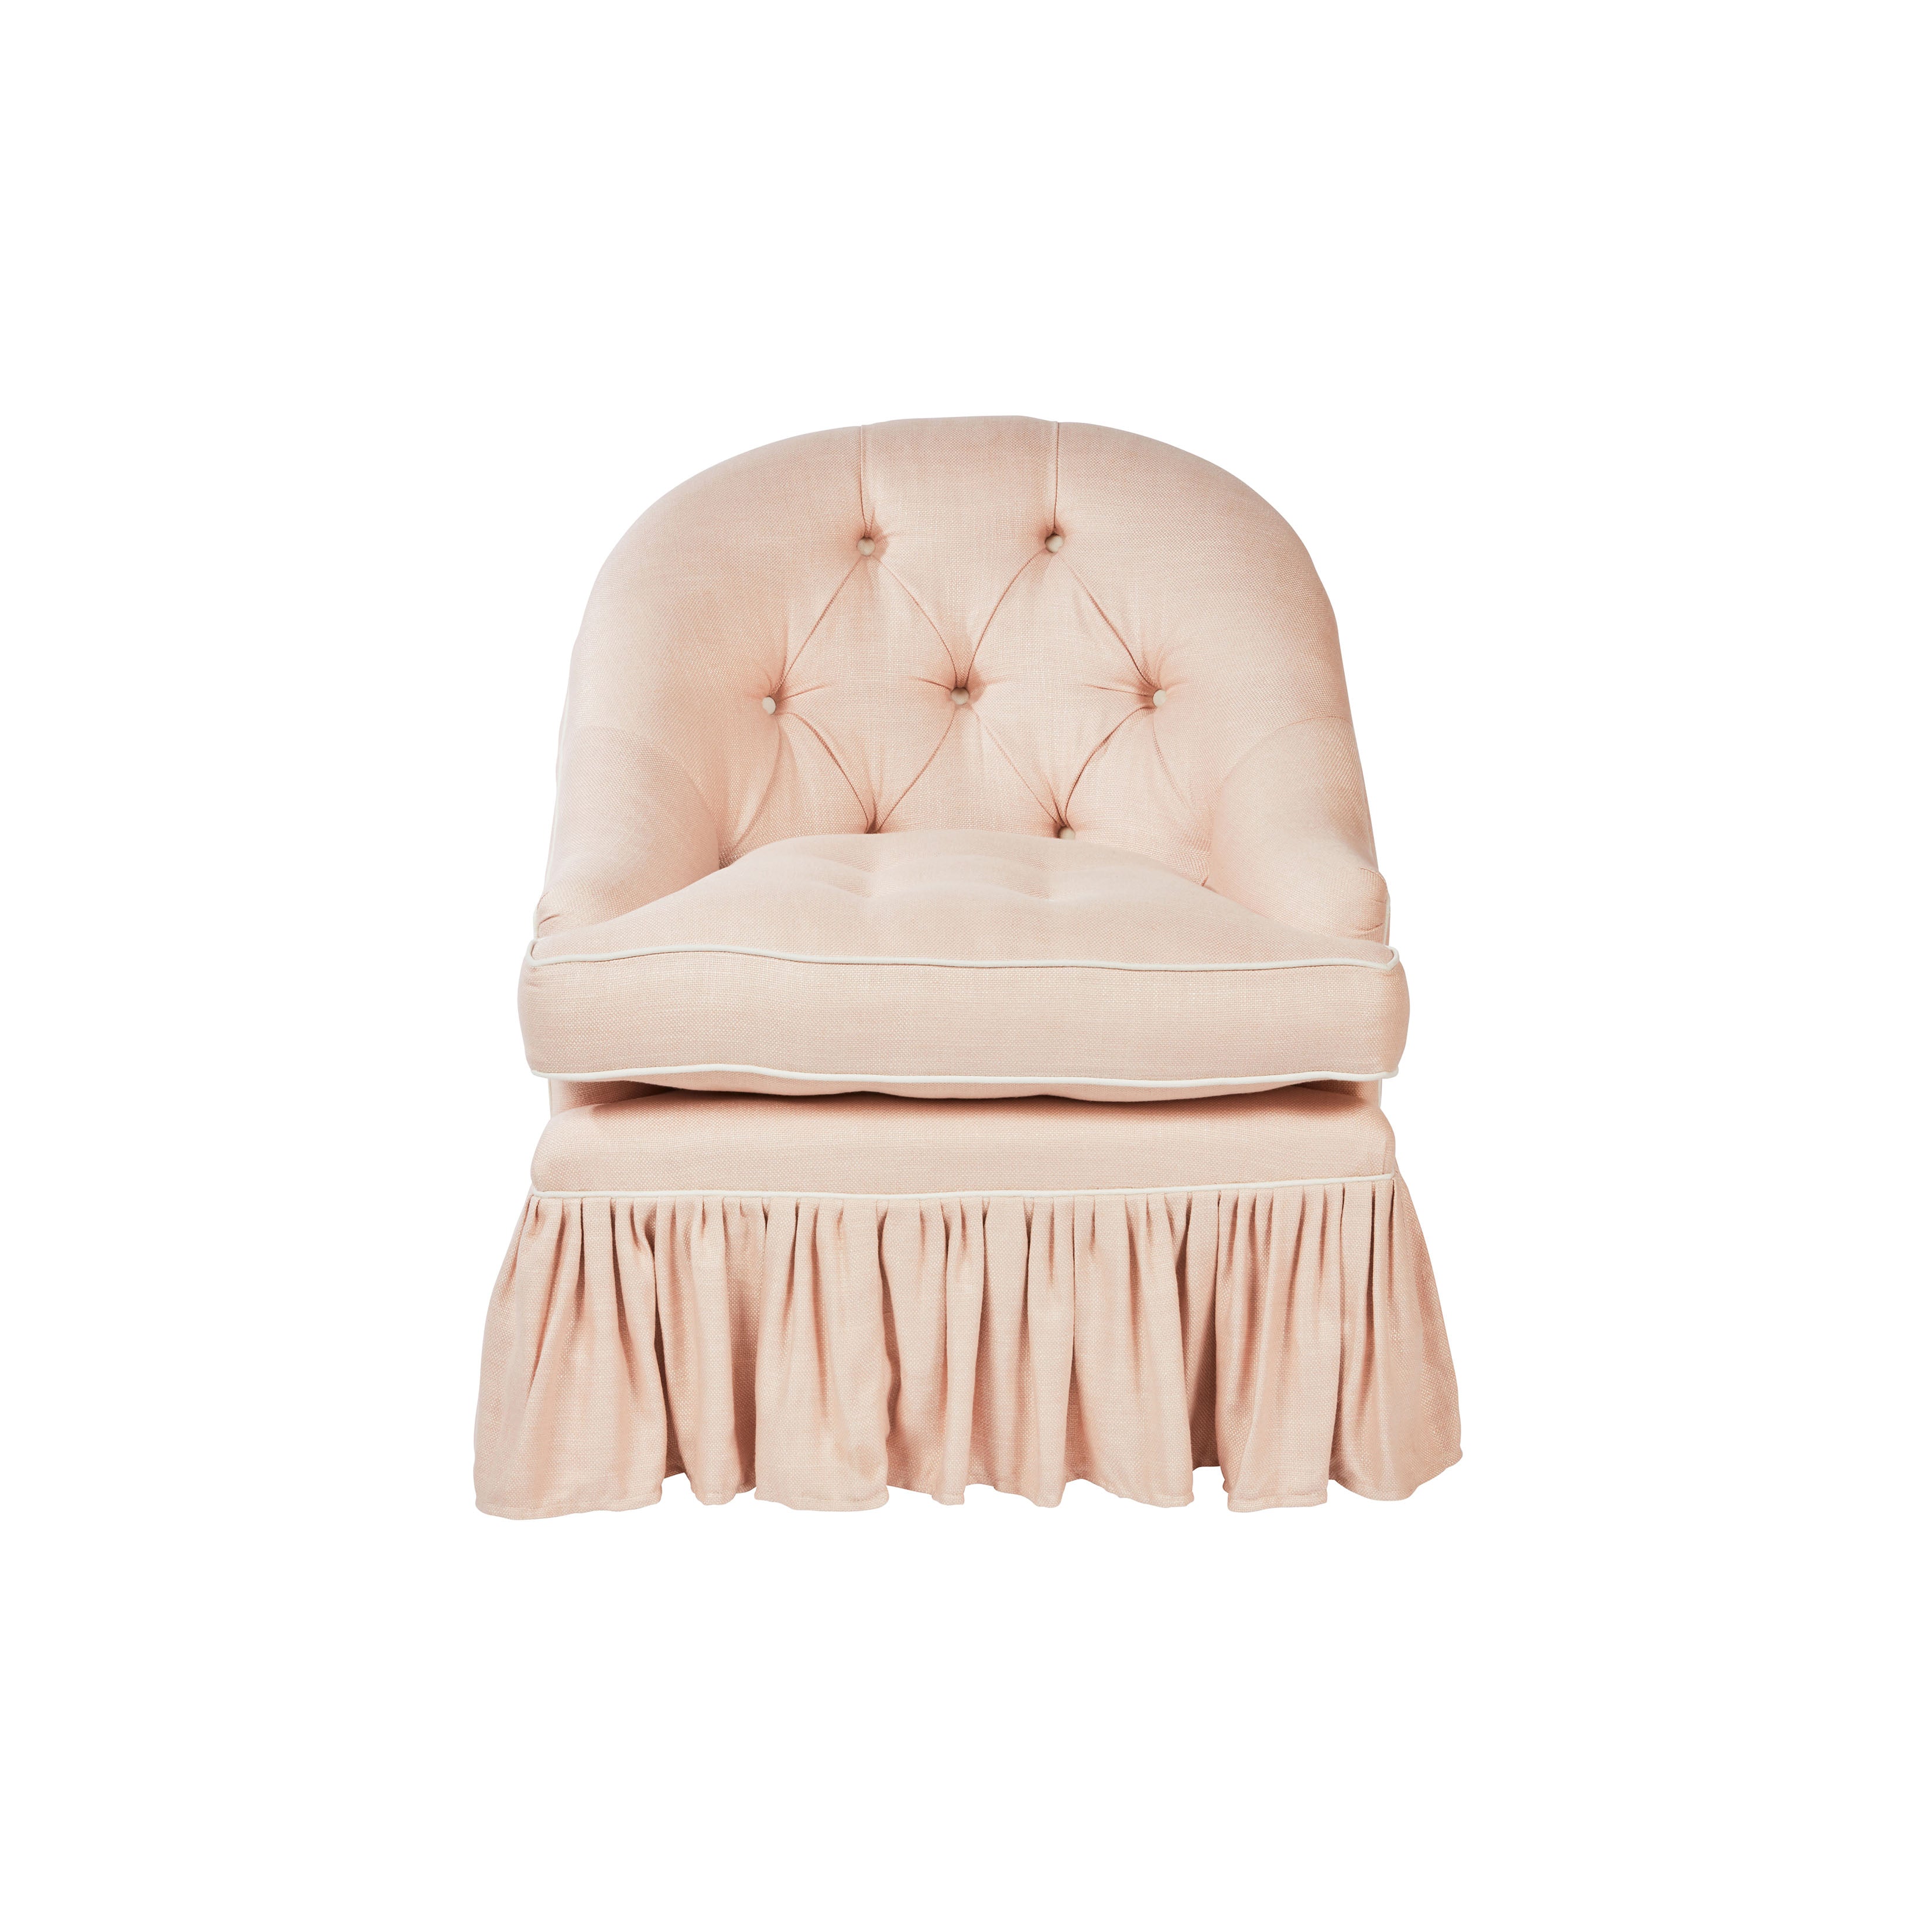 Nina Campbell Mabel Chair with Valance